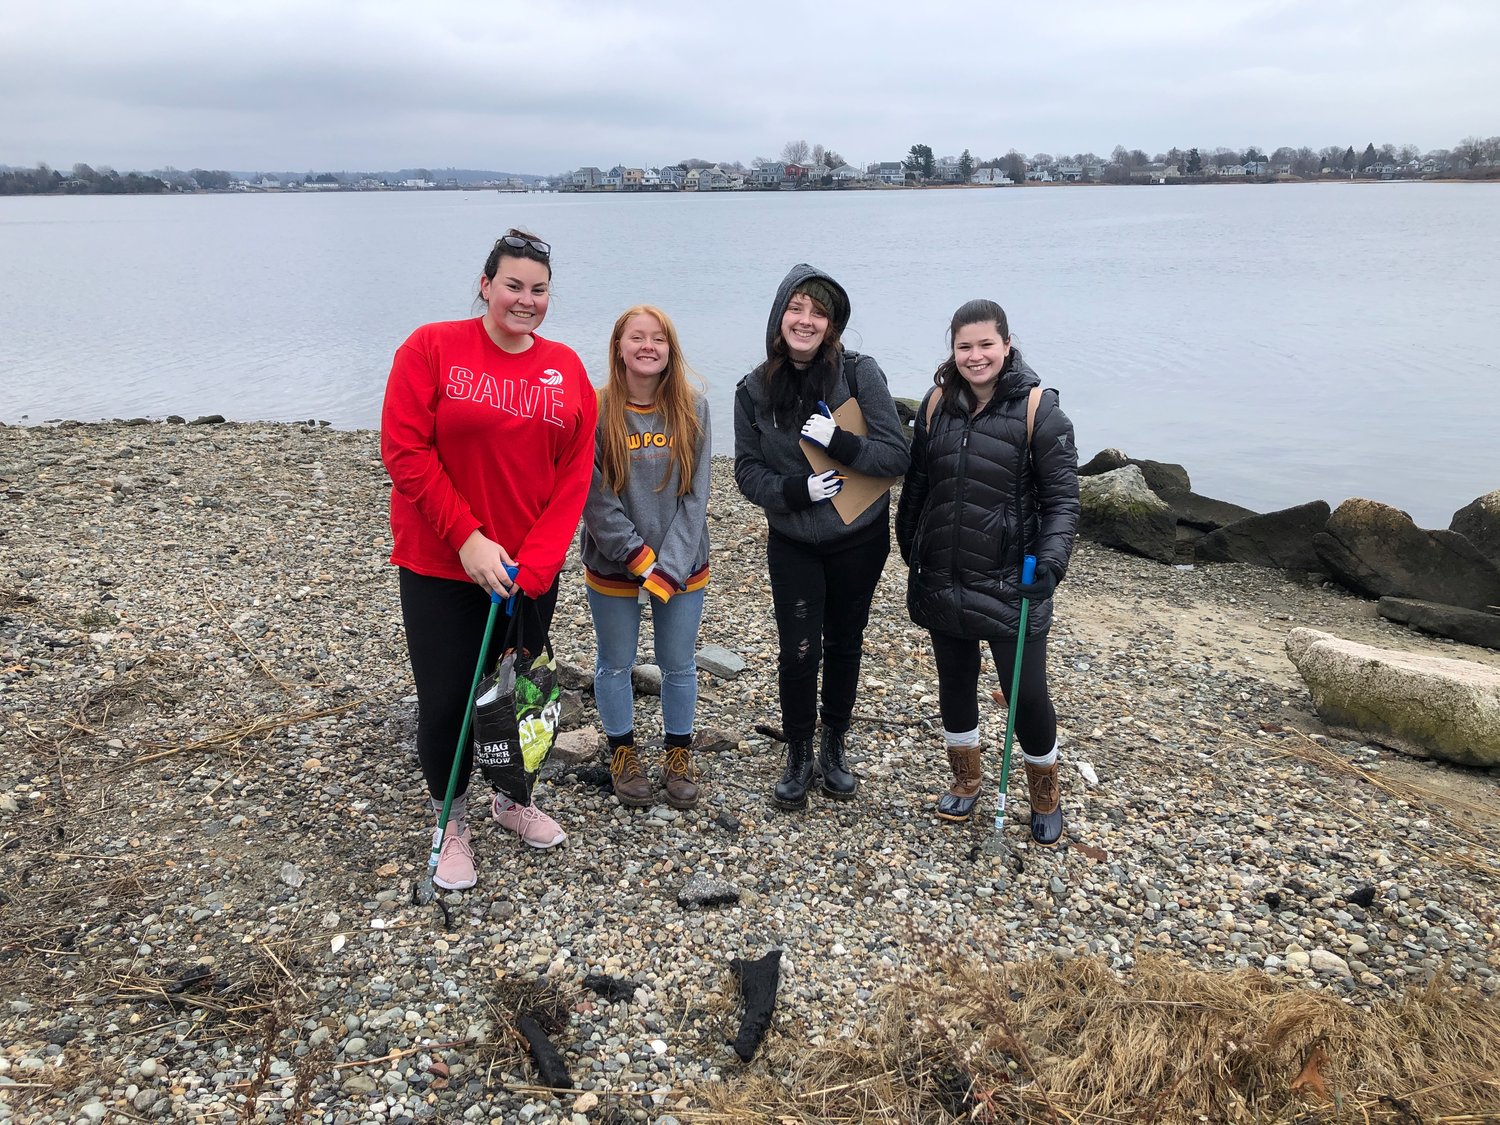 Students from Salve Regina University were among the volunteers who helped out at the Gull Cove cleanup on Saturday.